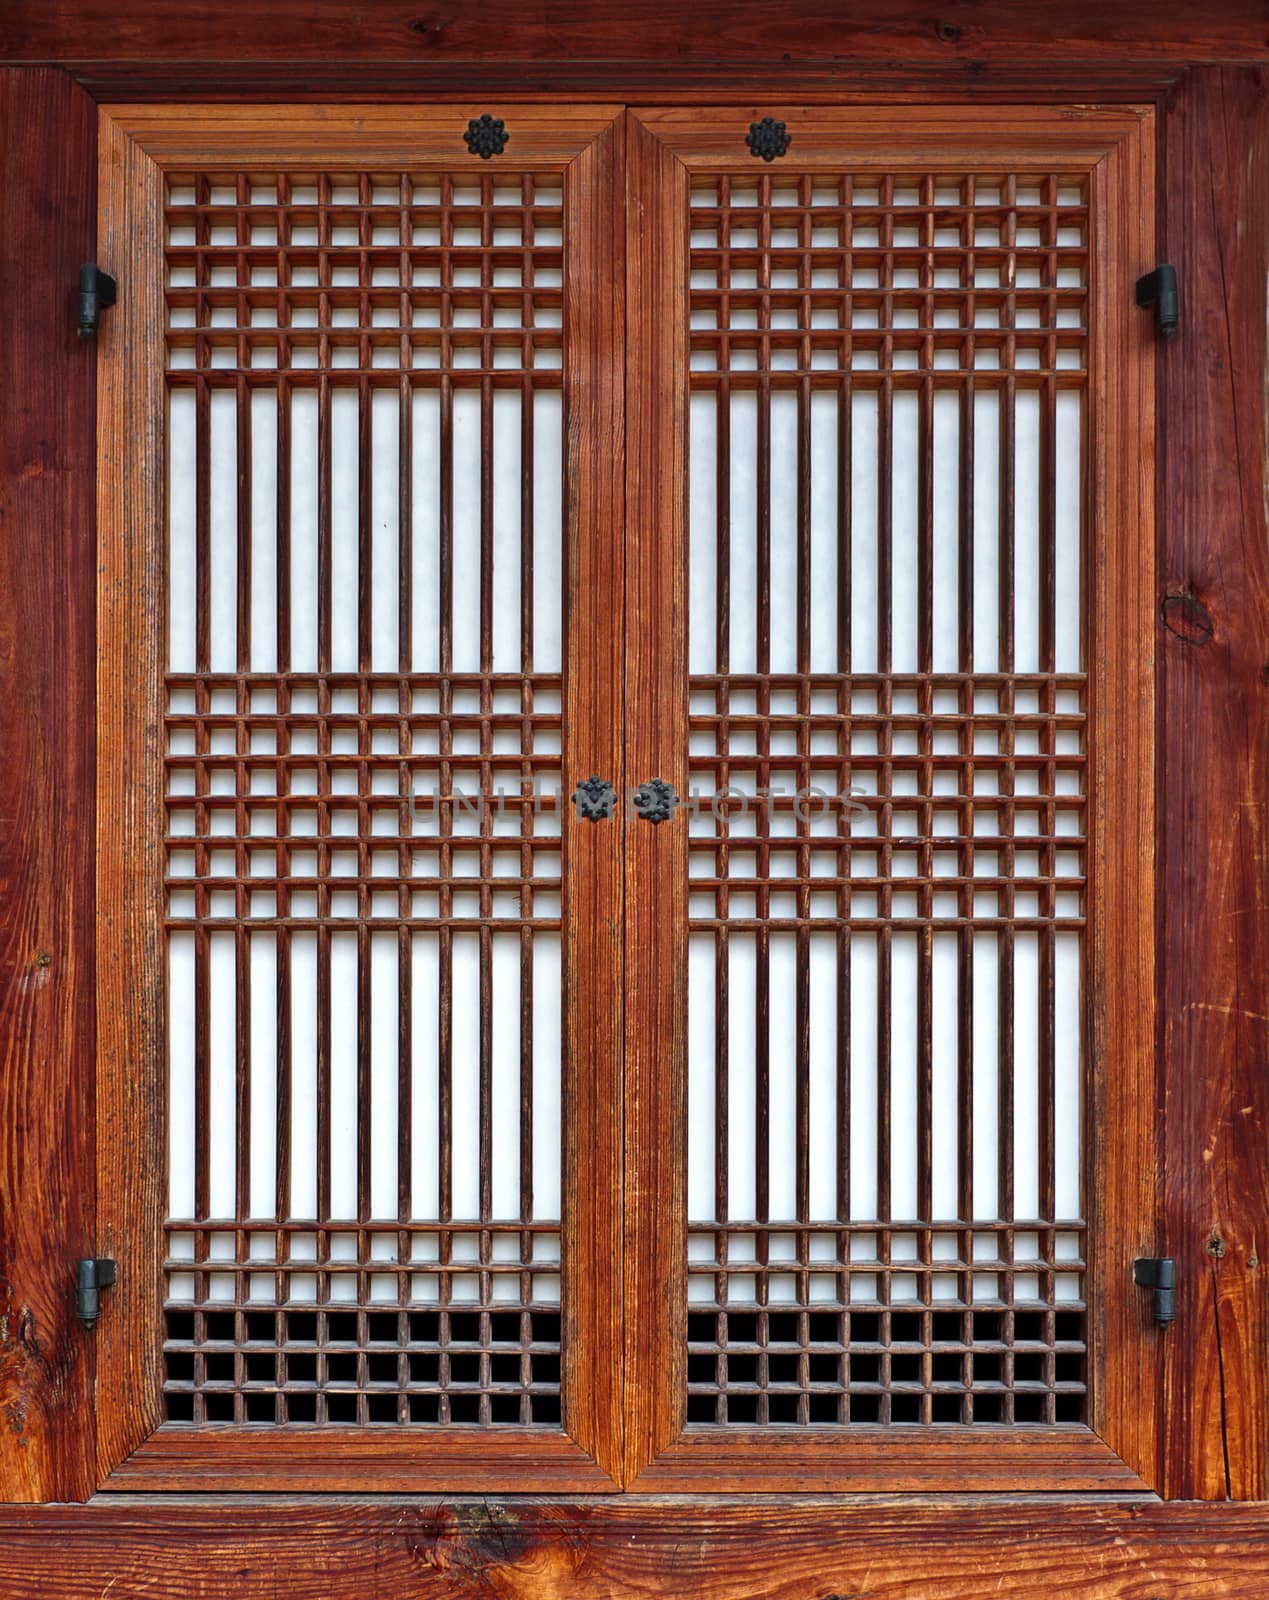 Vintage Korean style wooden window with closed laced shutters filling frame